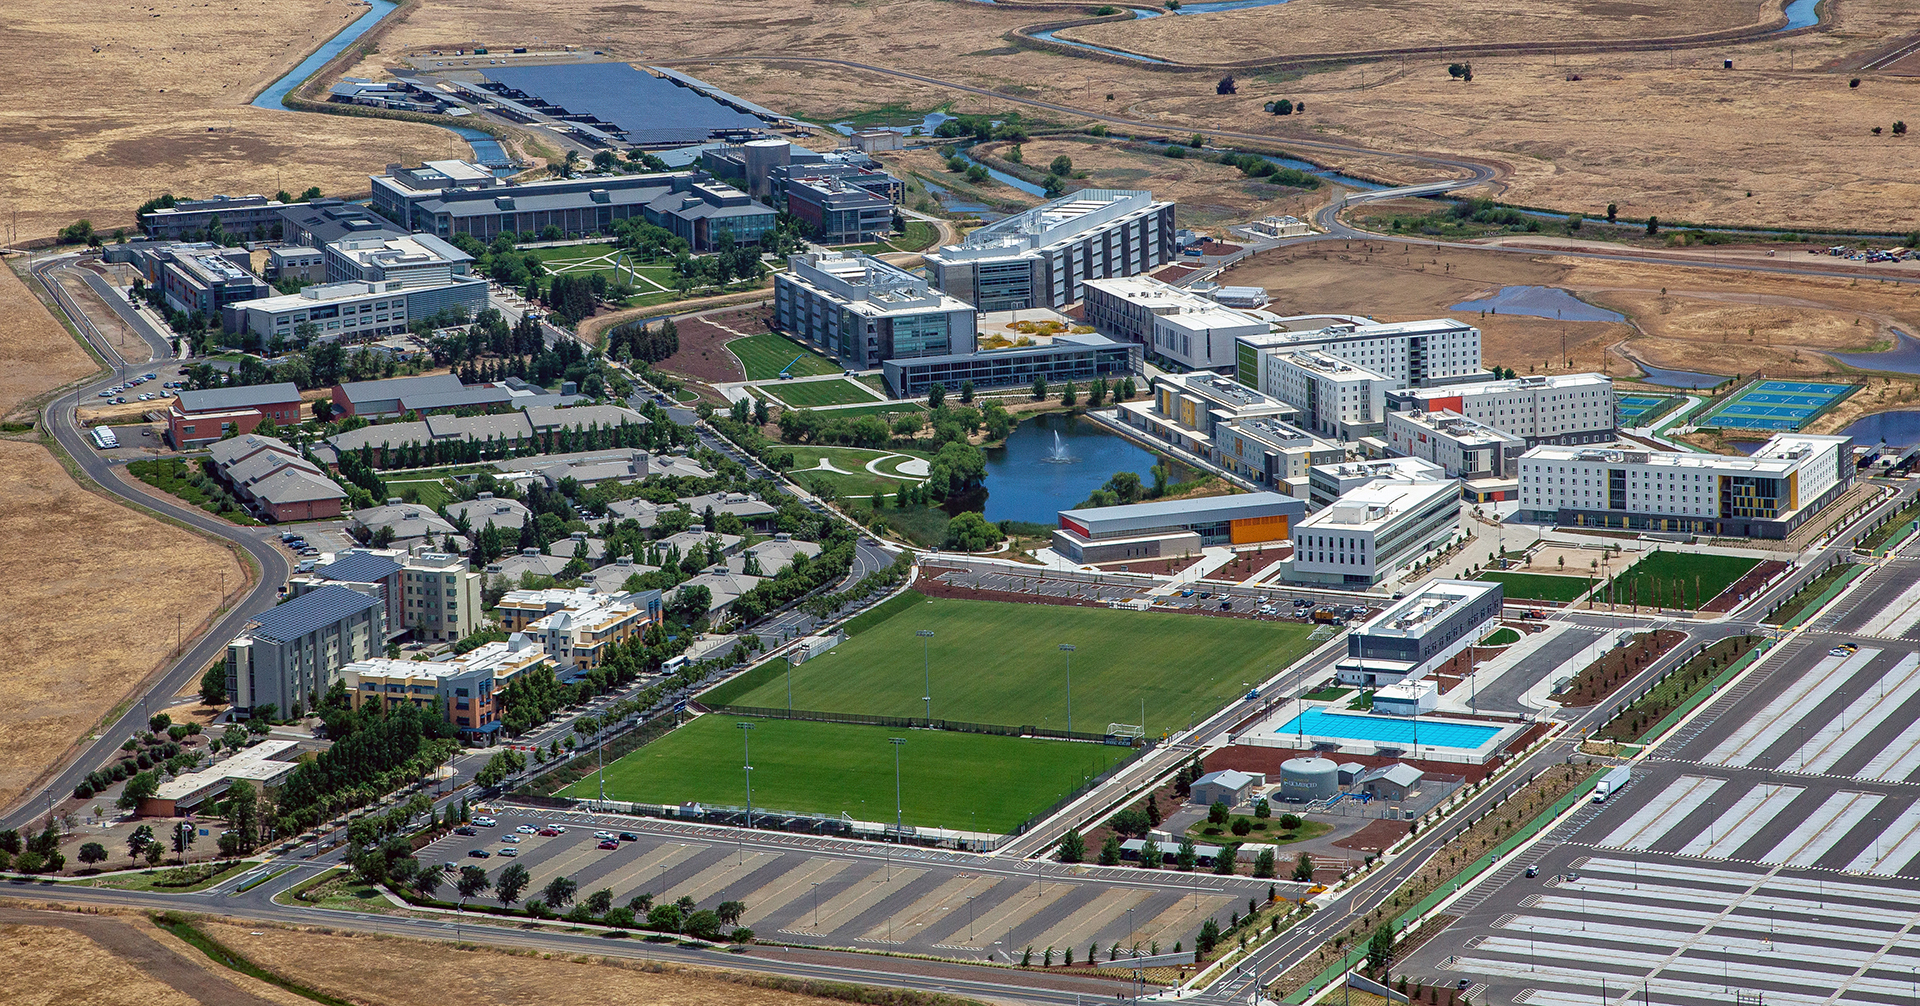 Release: UC Merced’s 2020 Project completed ahead of fall semester